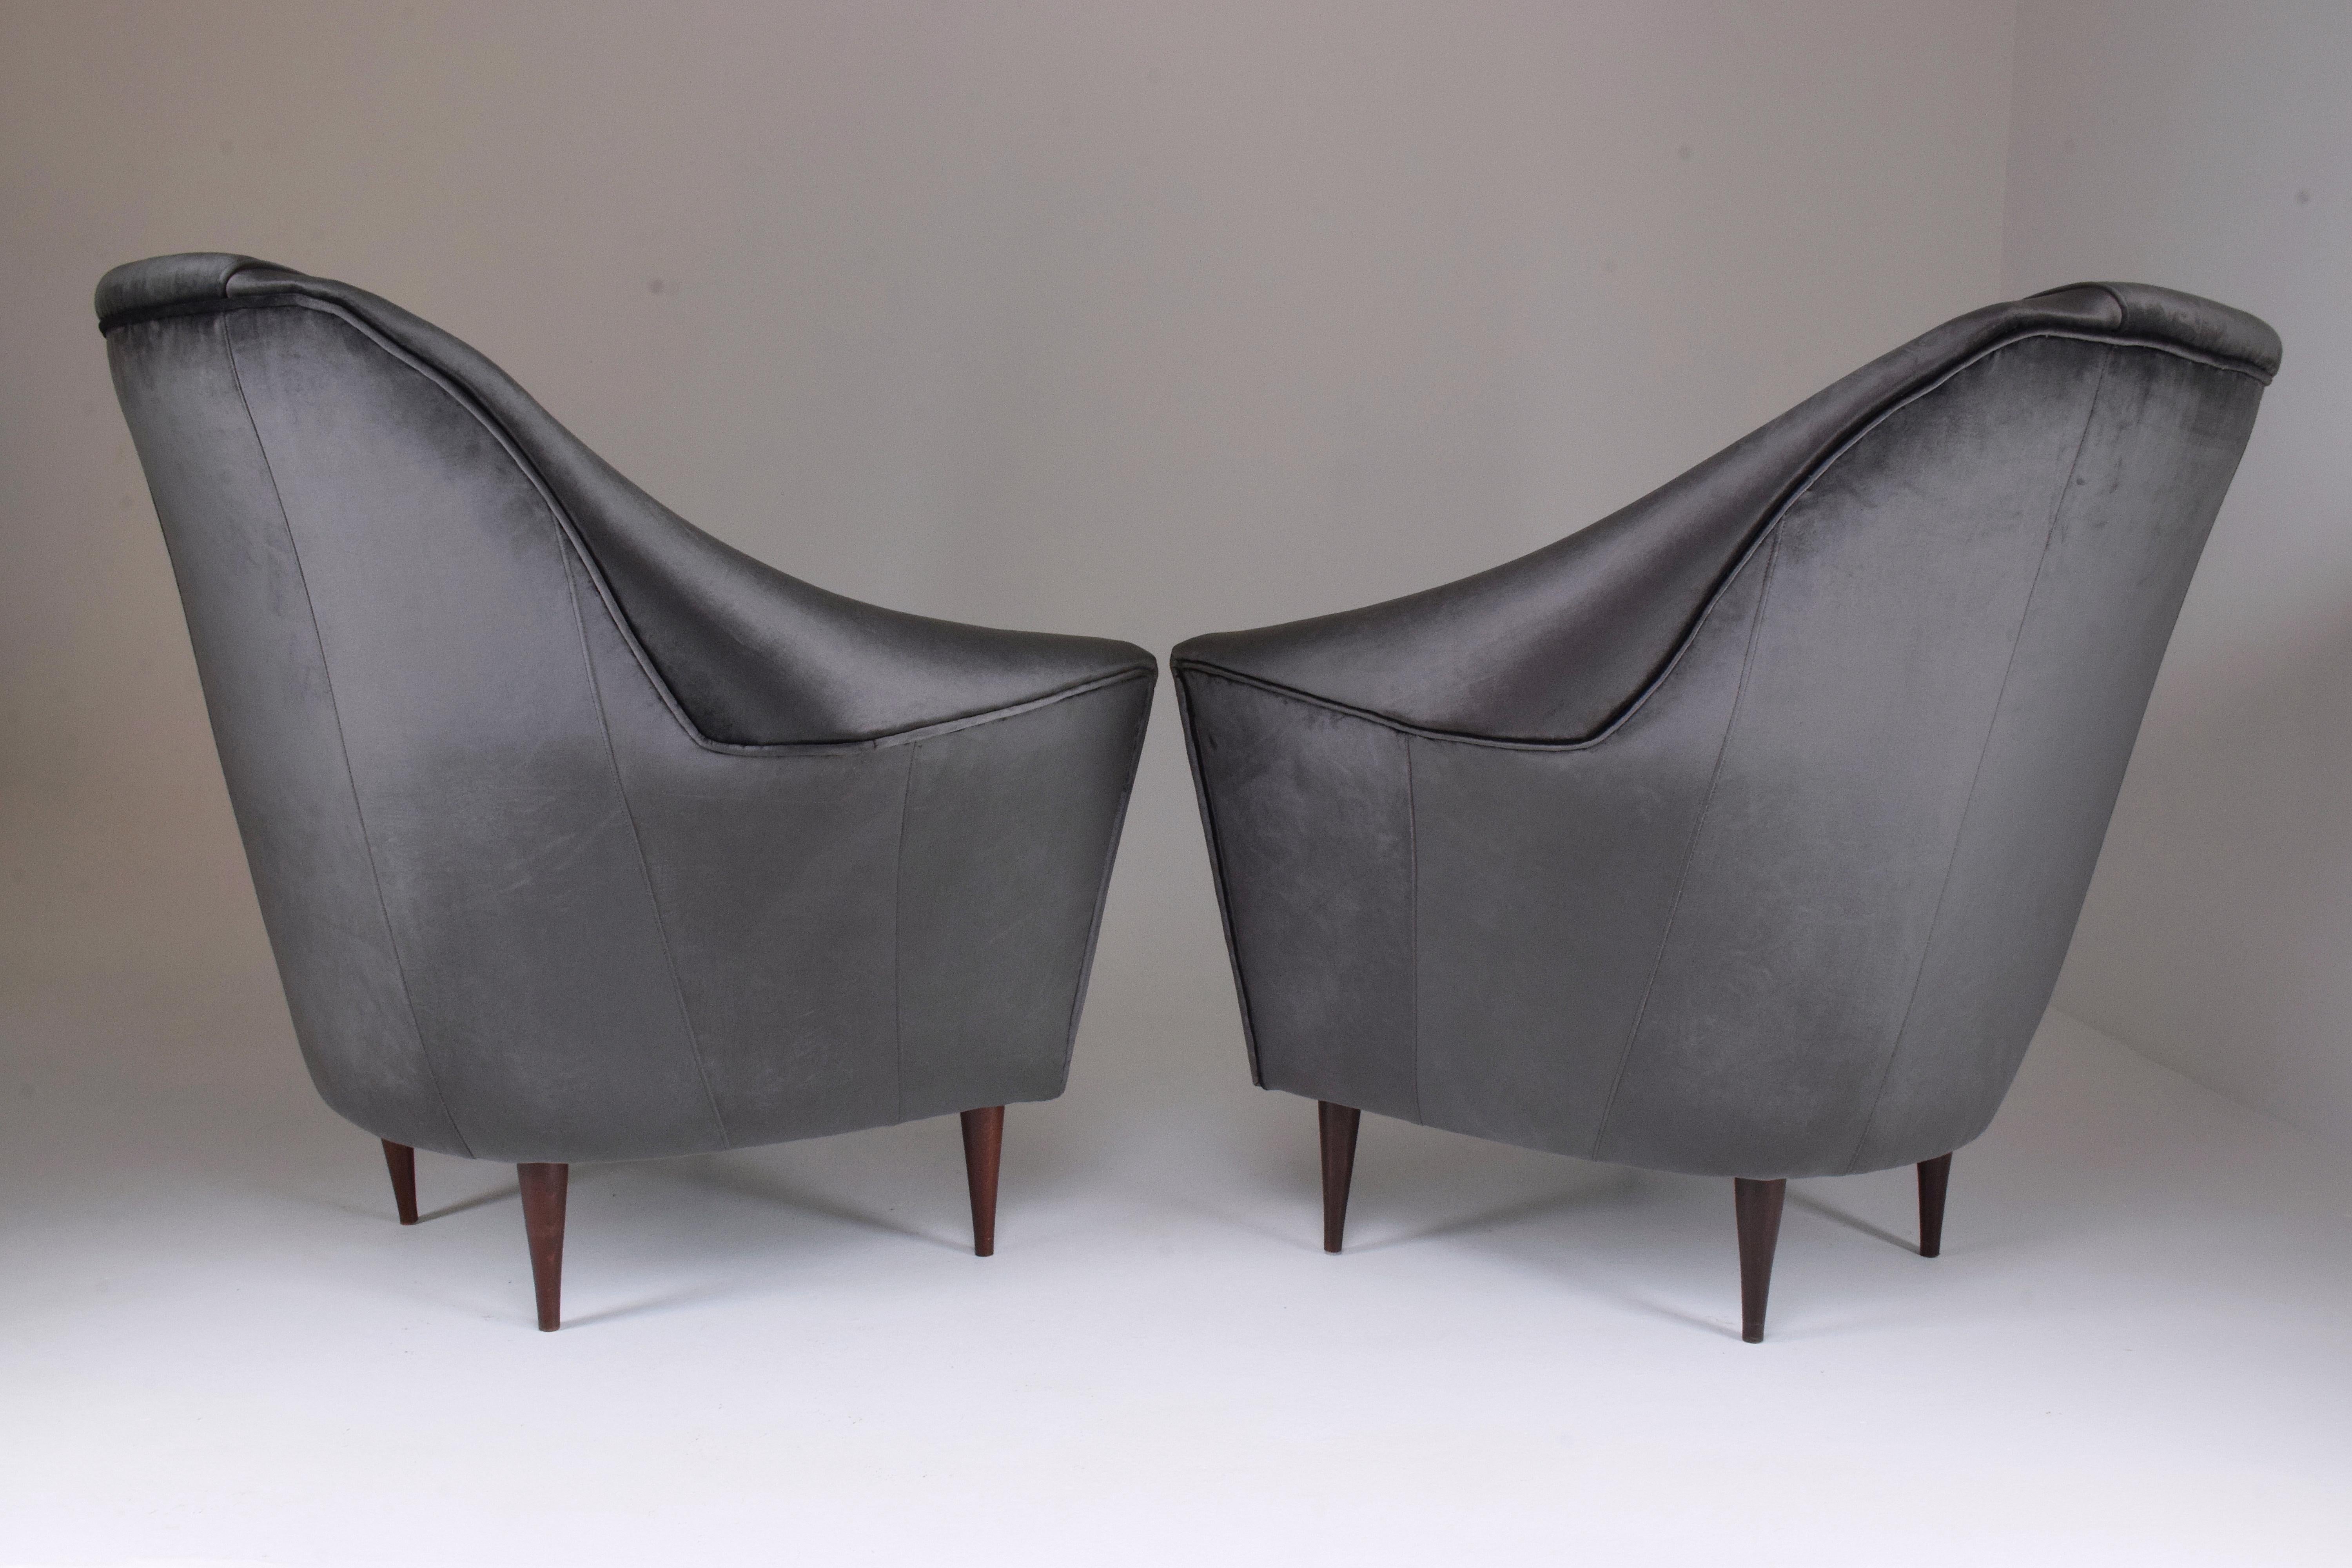 Velvet 20th Century Ico Parisi Armchairs for Ariberto Colombo, Set of Two, 1950s For Sale